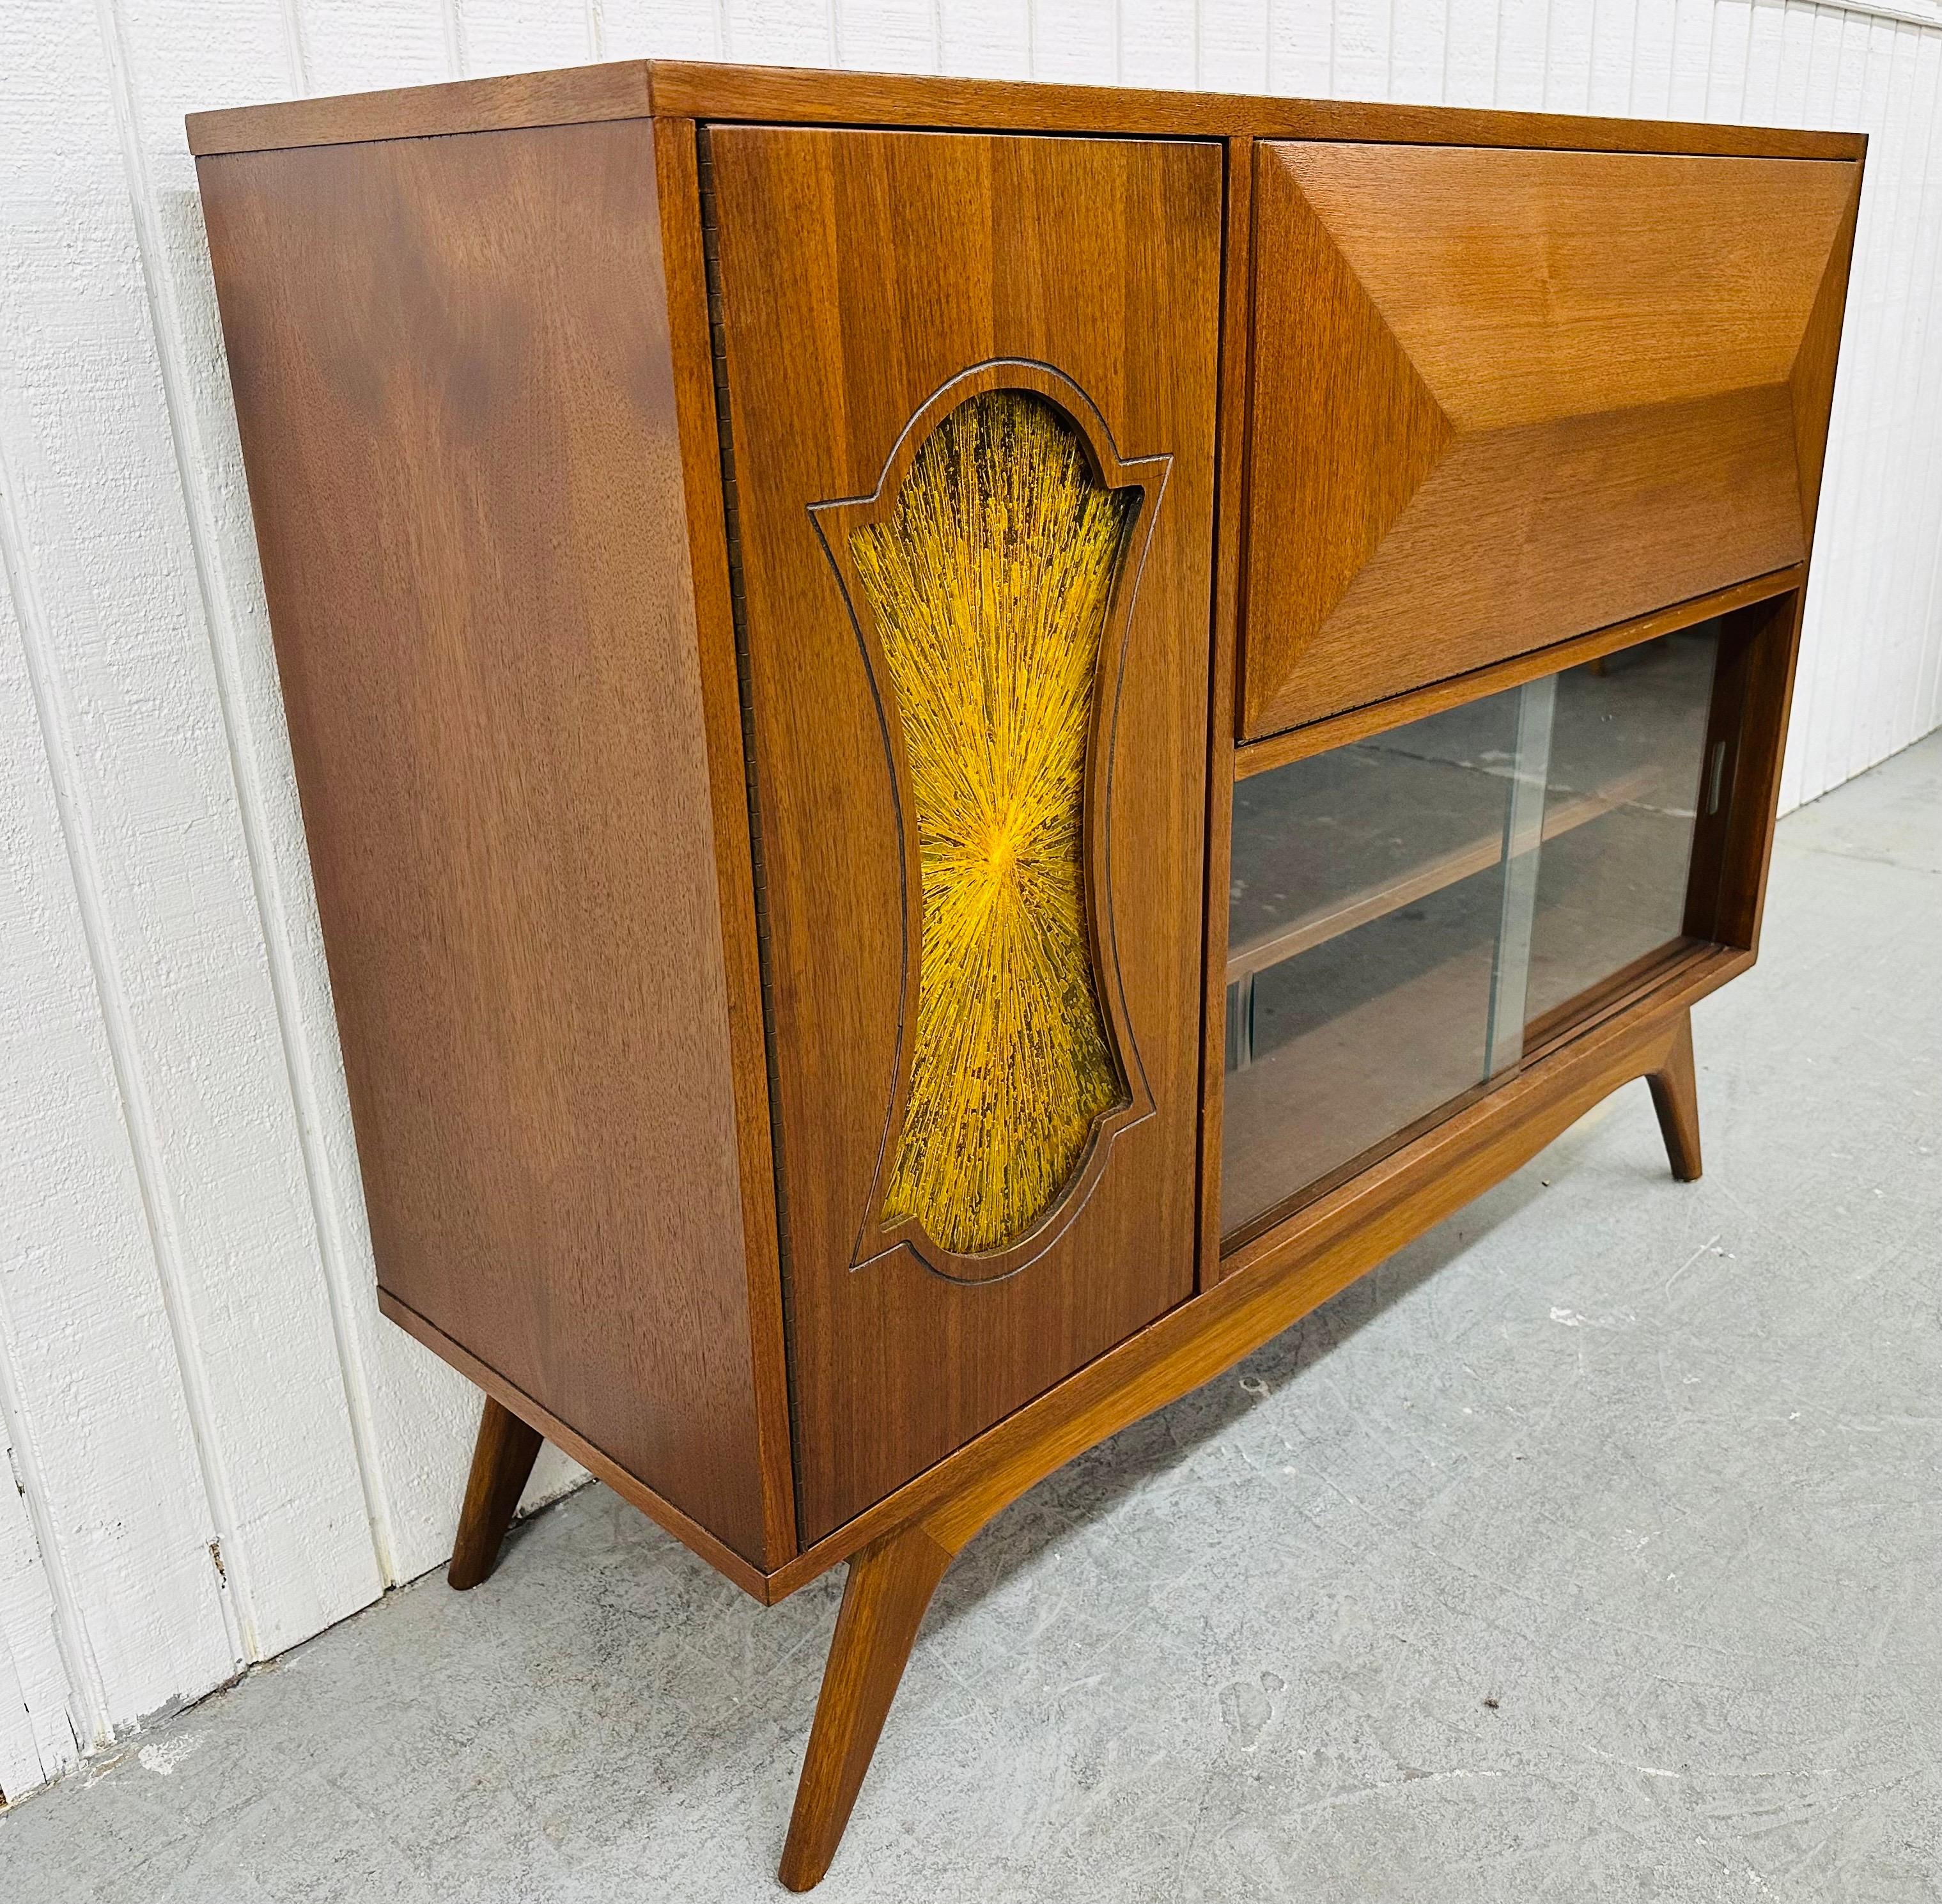 This listing is for a Mid-Century Modern Walnut Bar Cabinet. This super unique piece from the 1960’s features a straight line design, left sided door with yellow stained glass that opens up to storage space, a drop down door that reveals a hidden